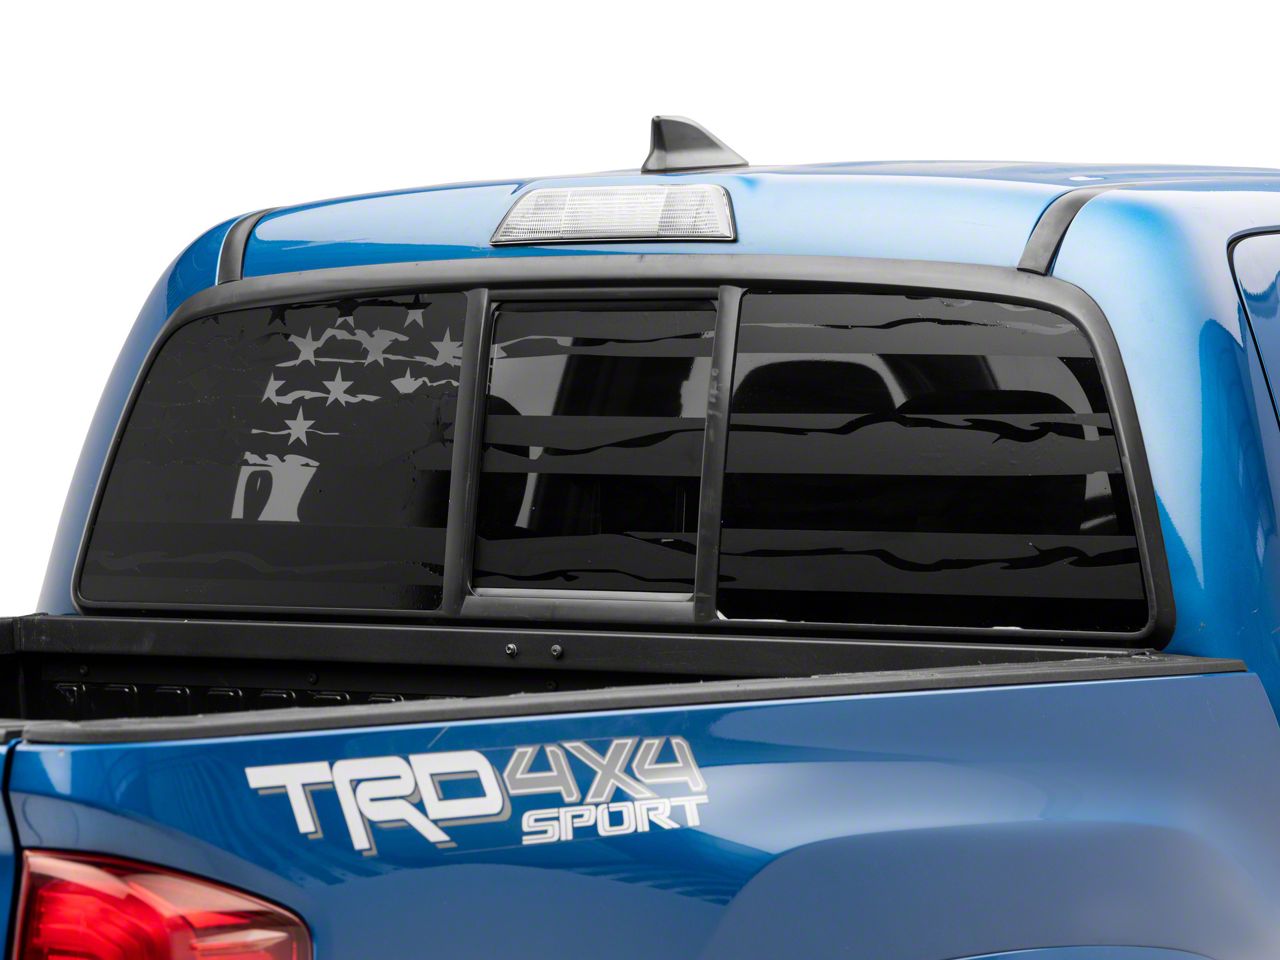 Thin Blue Line Distressed USA American Flag Decals for Toyota Tacoma in Matte Black for Crew Cab windows TP3.BA Fits 3rd Generation 2016-2019 